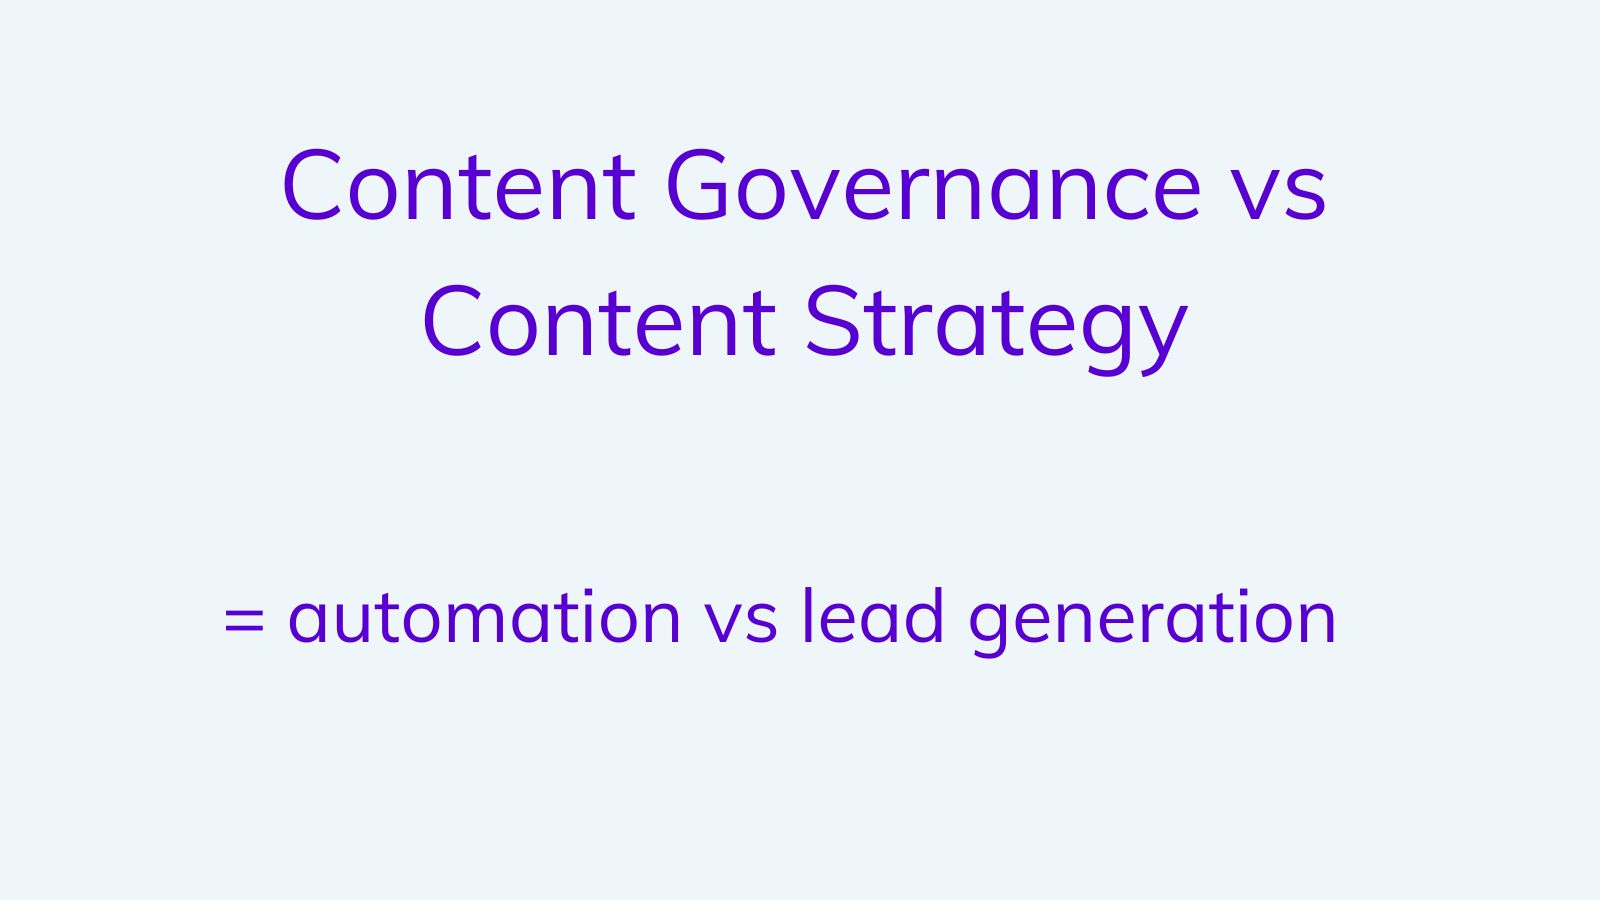 Content strategy vs content governance on agilitycms.com